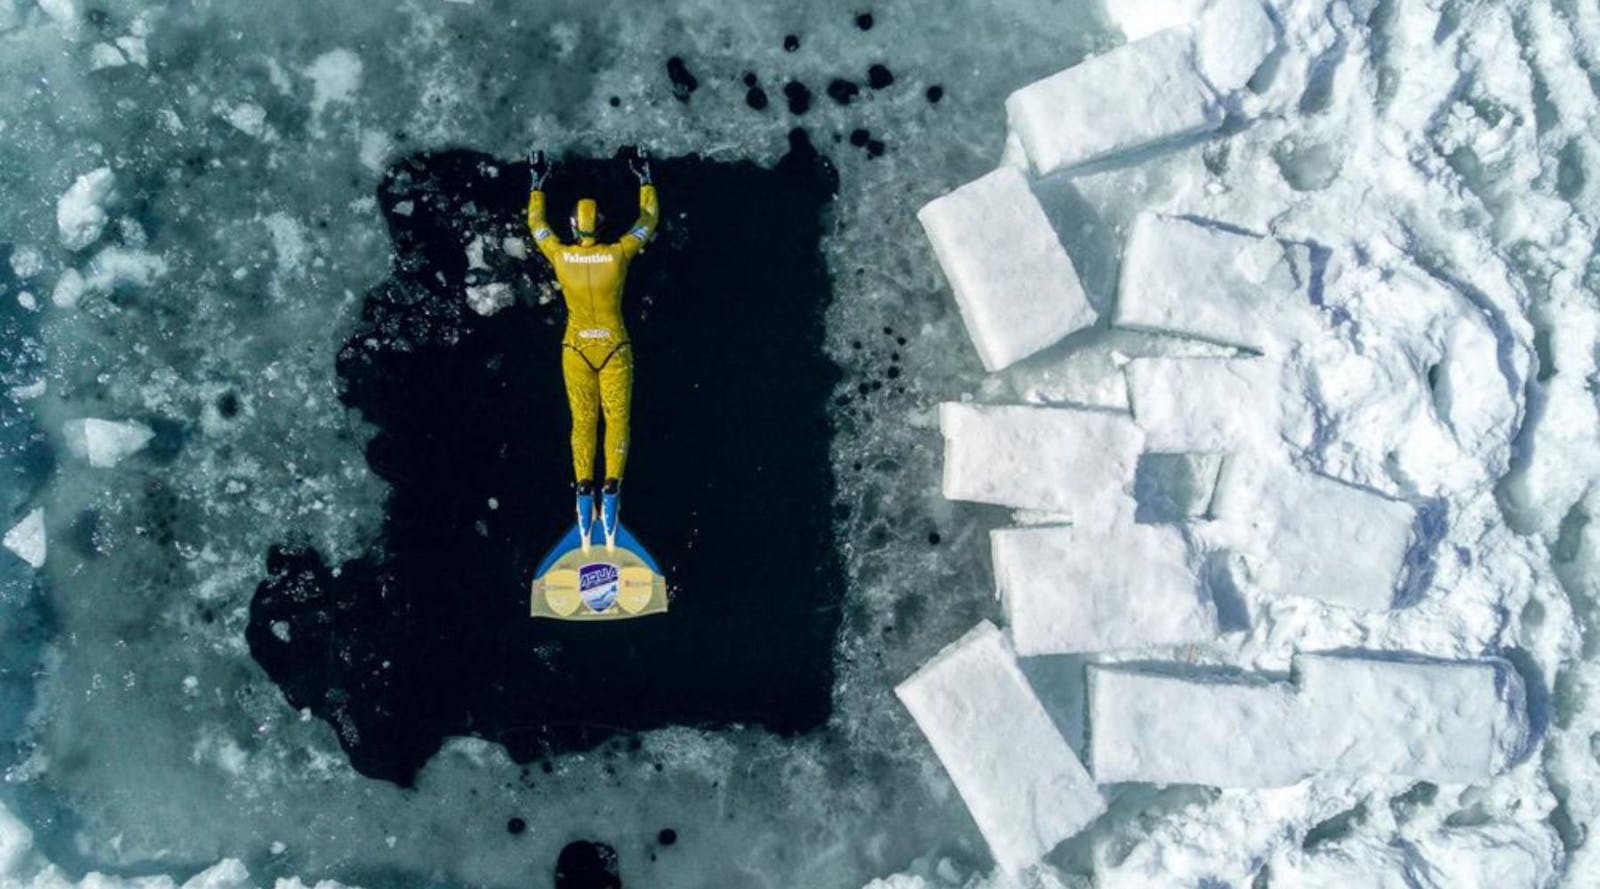 Man in yellow wetsuit free diving in ice water